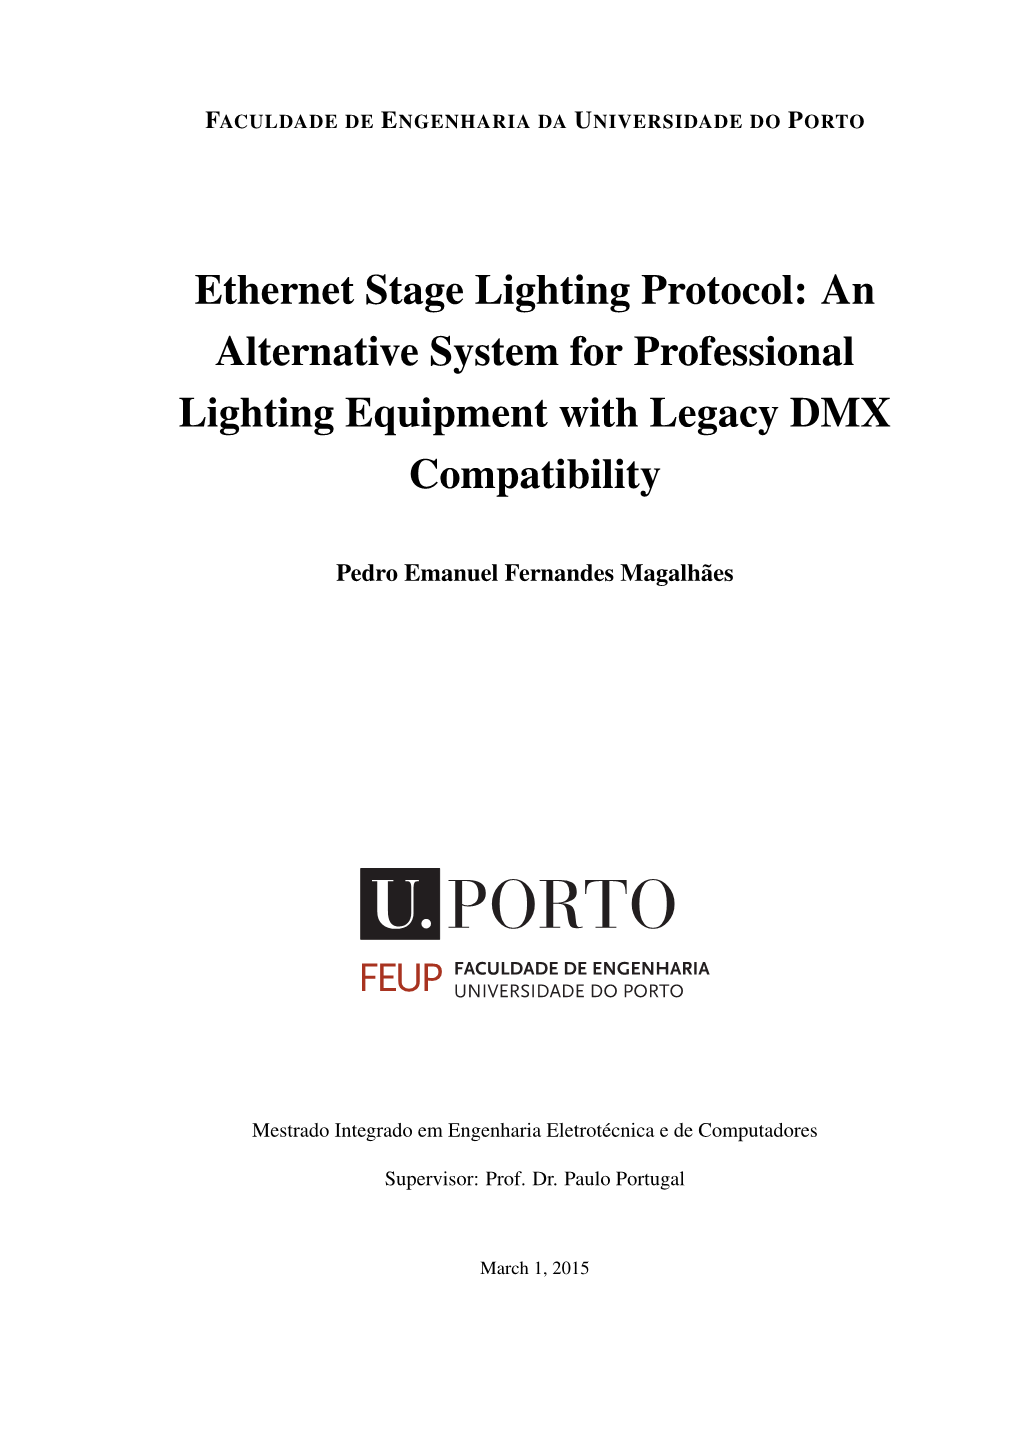 Ethernet Stage Lighting Protocol: an Alternative System for Professional Lighting Equipment with Legacy DMX Compatibility